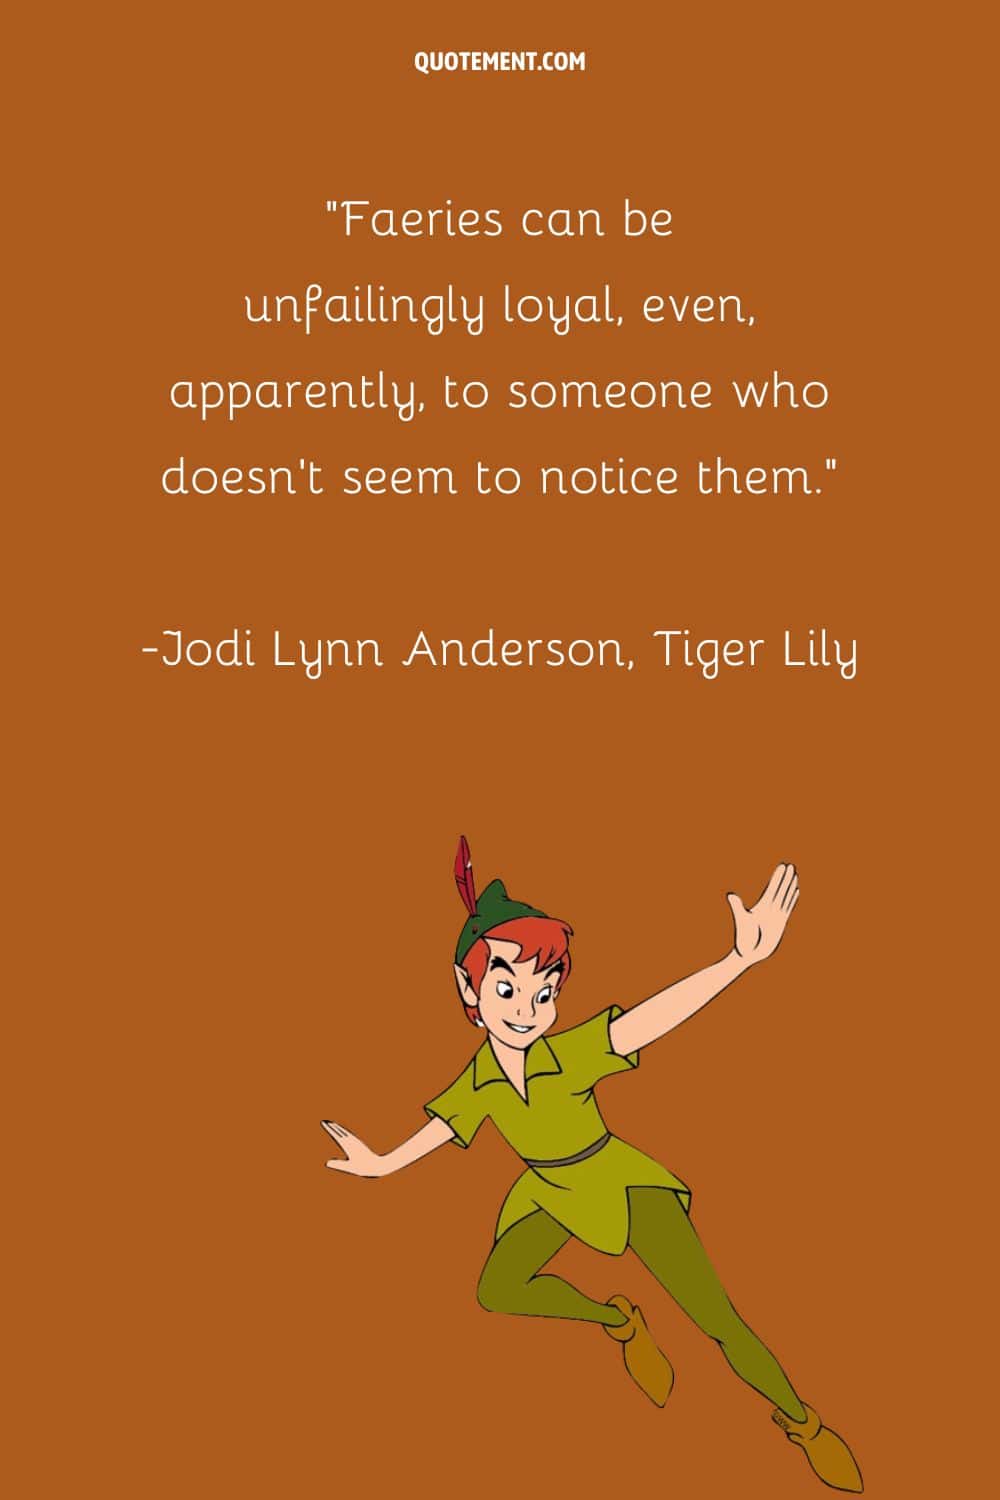 “Faeries can be unfailingly loyal, even, apparently, to someone who doesn't seem to notice them.” ― Jodi Lynn Anderson, Tiger Lily